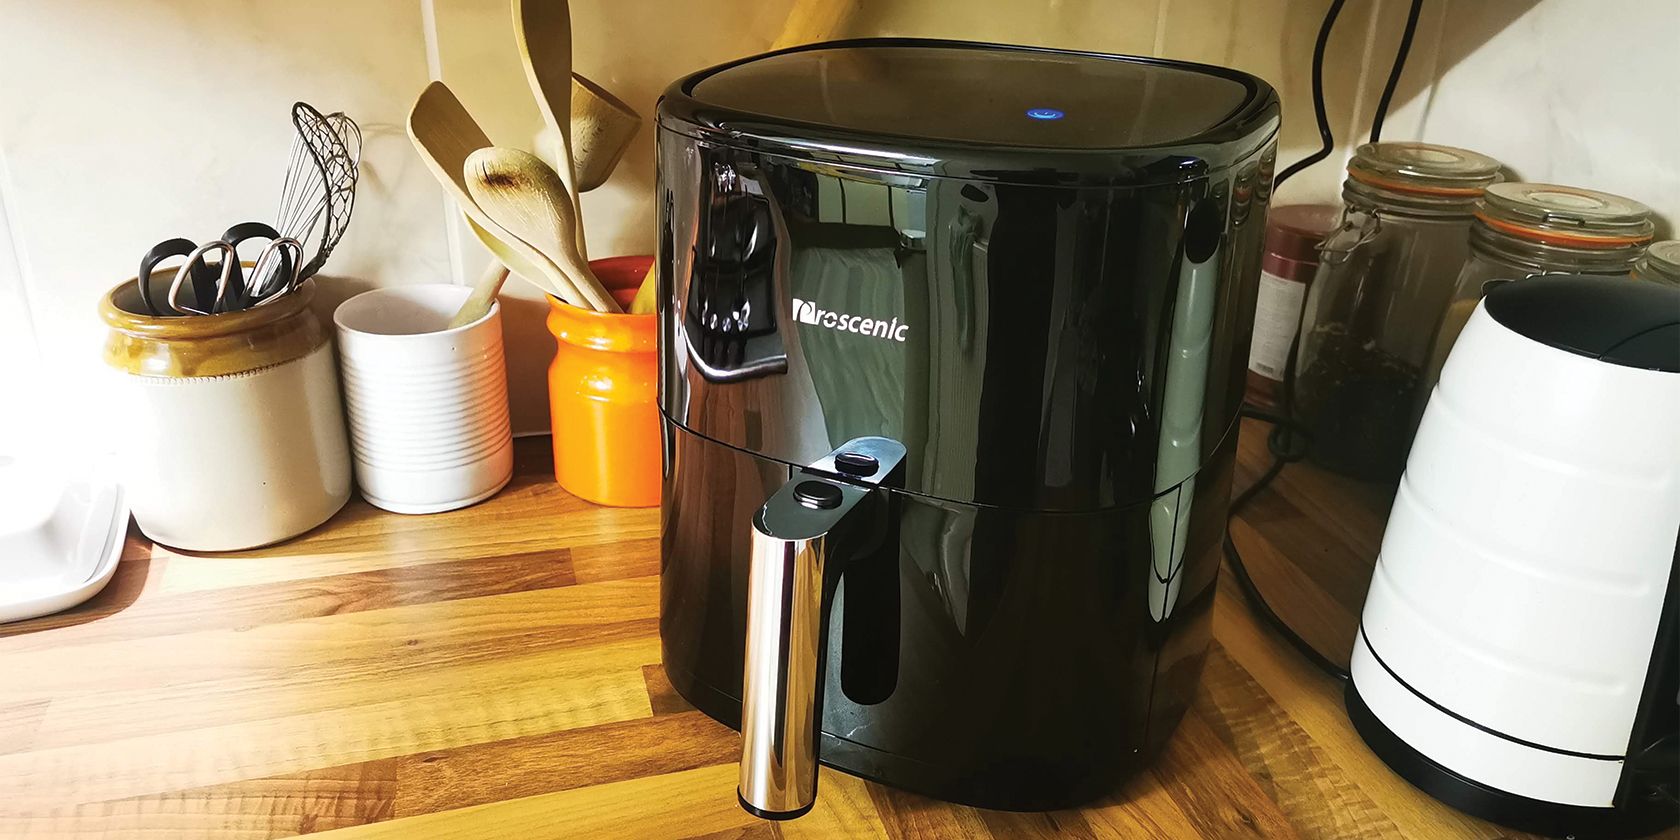 Proscenic T22 Air Fryer Review: Can You Air-Fry Cornflakes?